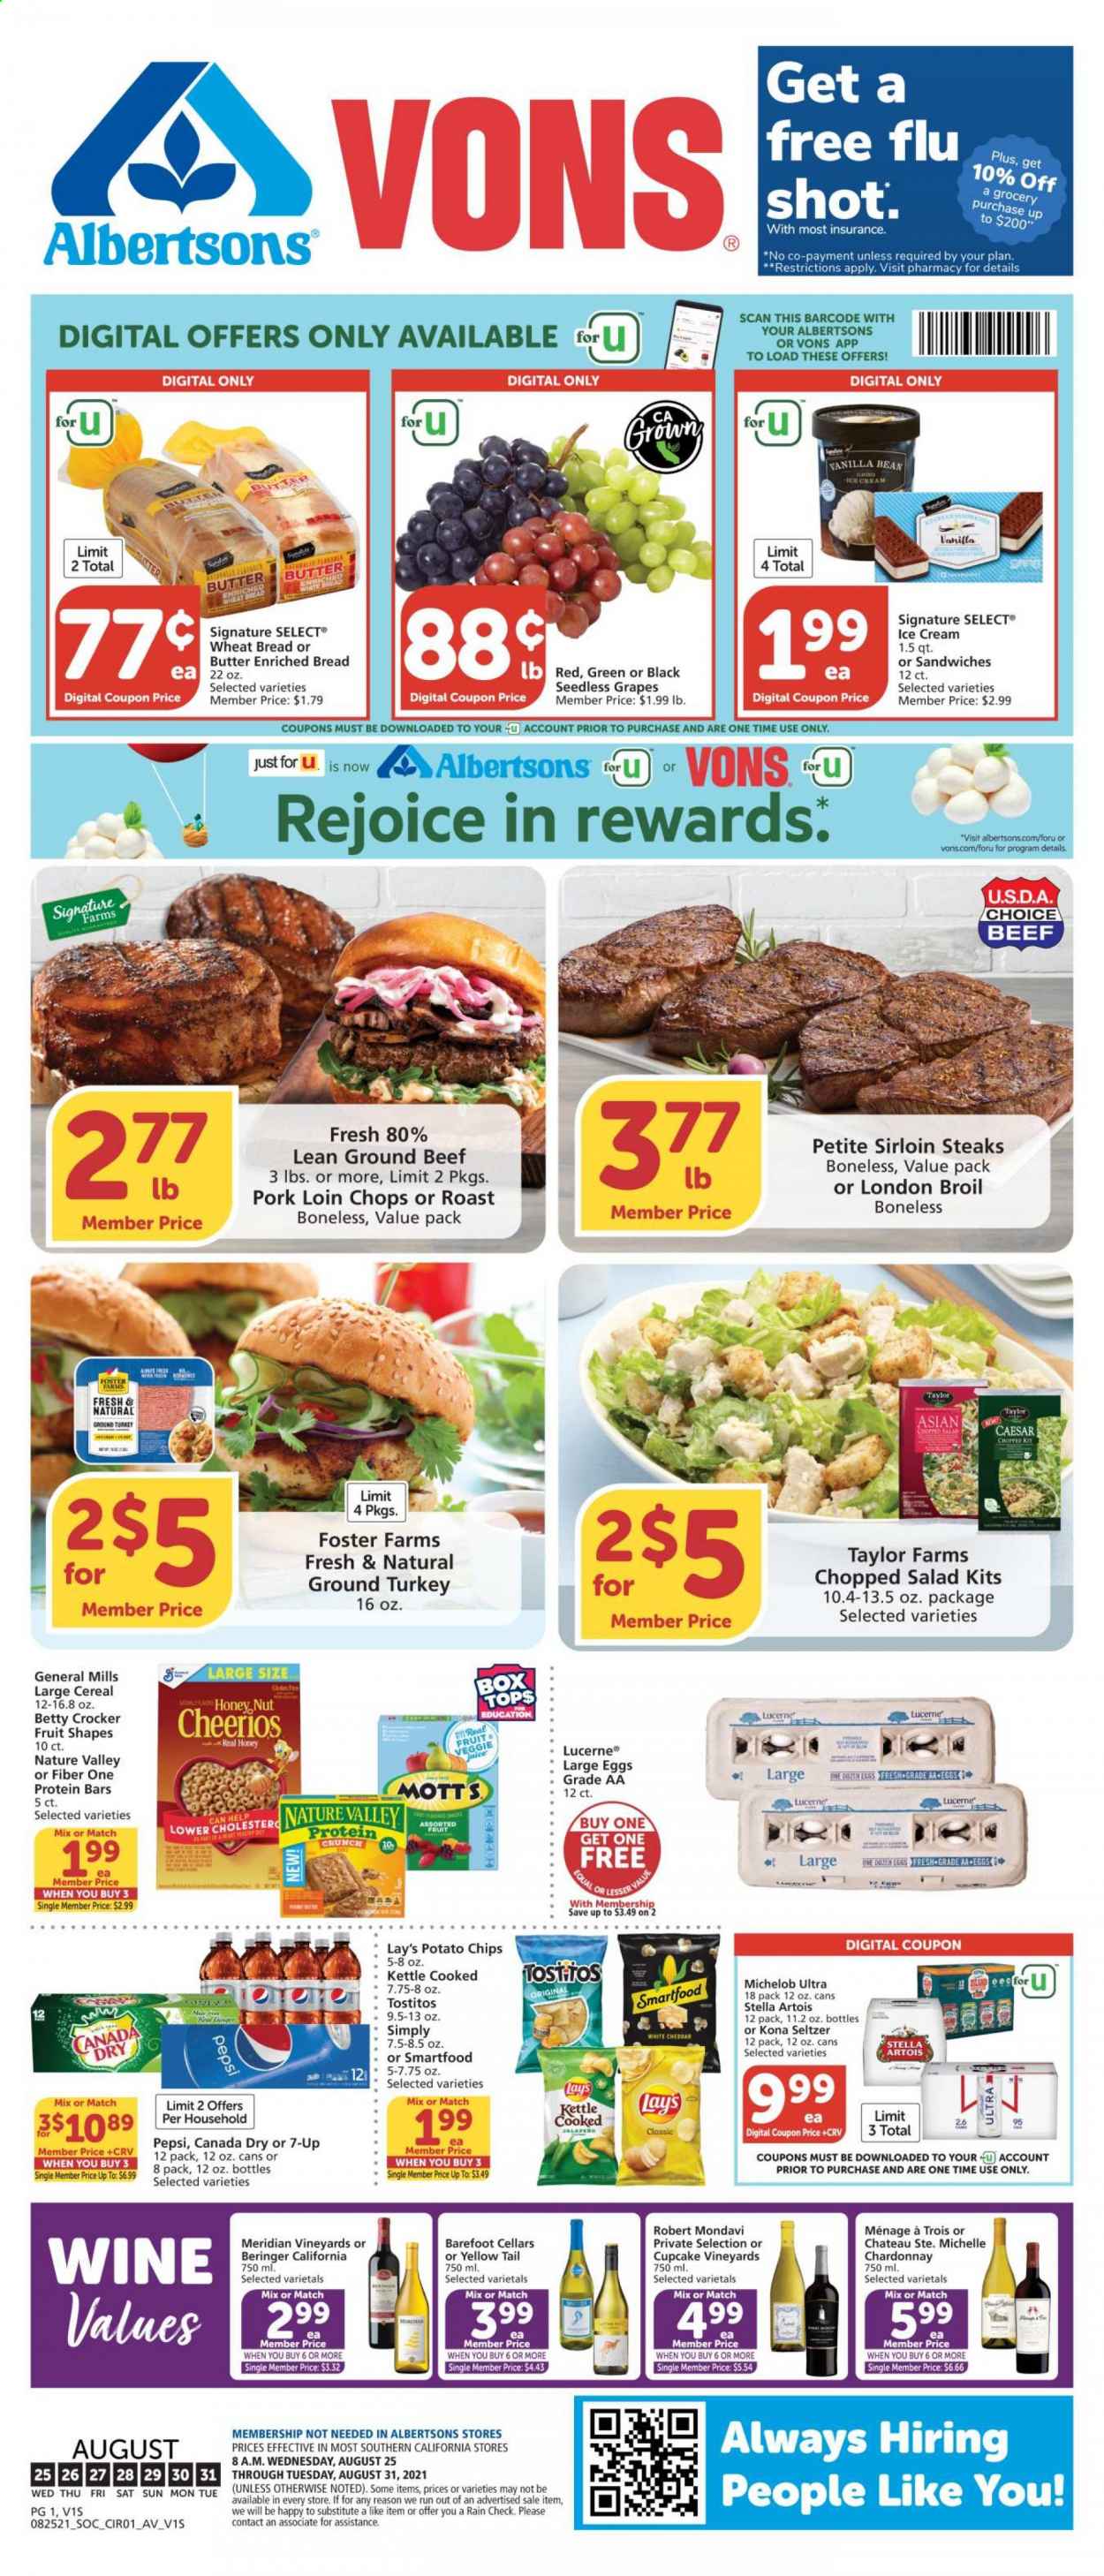 thumbnail - Vons Flyer - 08/25/2021 - 08/31/2021 - Sales products - seedless grapes, wheat bread, salad, chopped salad, grapes, Mott's, ground turkey, beef meat, ground beef, steak, sirloin steak, pork chops, pork loin, pork meat, sandwich, large eggs, butter, ice cream, potato chips, chips, Lay’s, Smartfood, Tostitos, cereals, Cheerios, protein bar, Nature Valley, Fiber One, Canada Dry, Pepsi, juice, 7UP, seltzer water, white wine, Chardonnay, wine, Cupcake Vineyards, beer, Stella Artois, Michelob. Page 1.